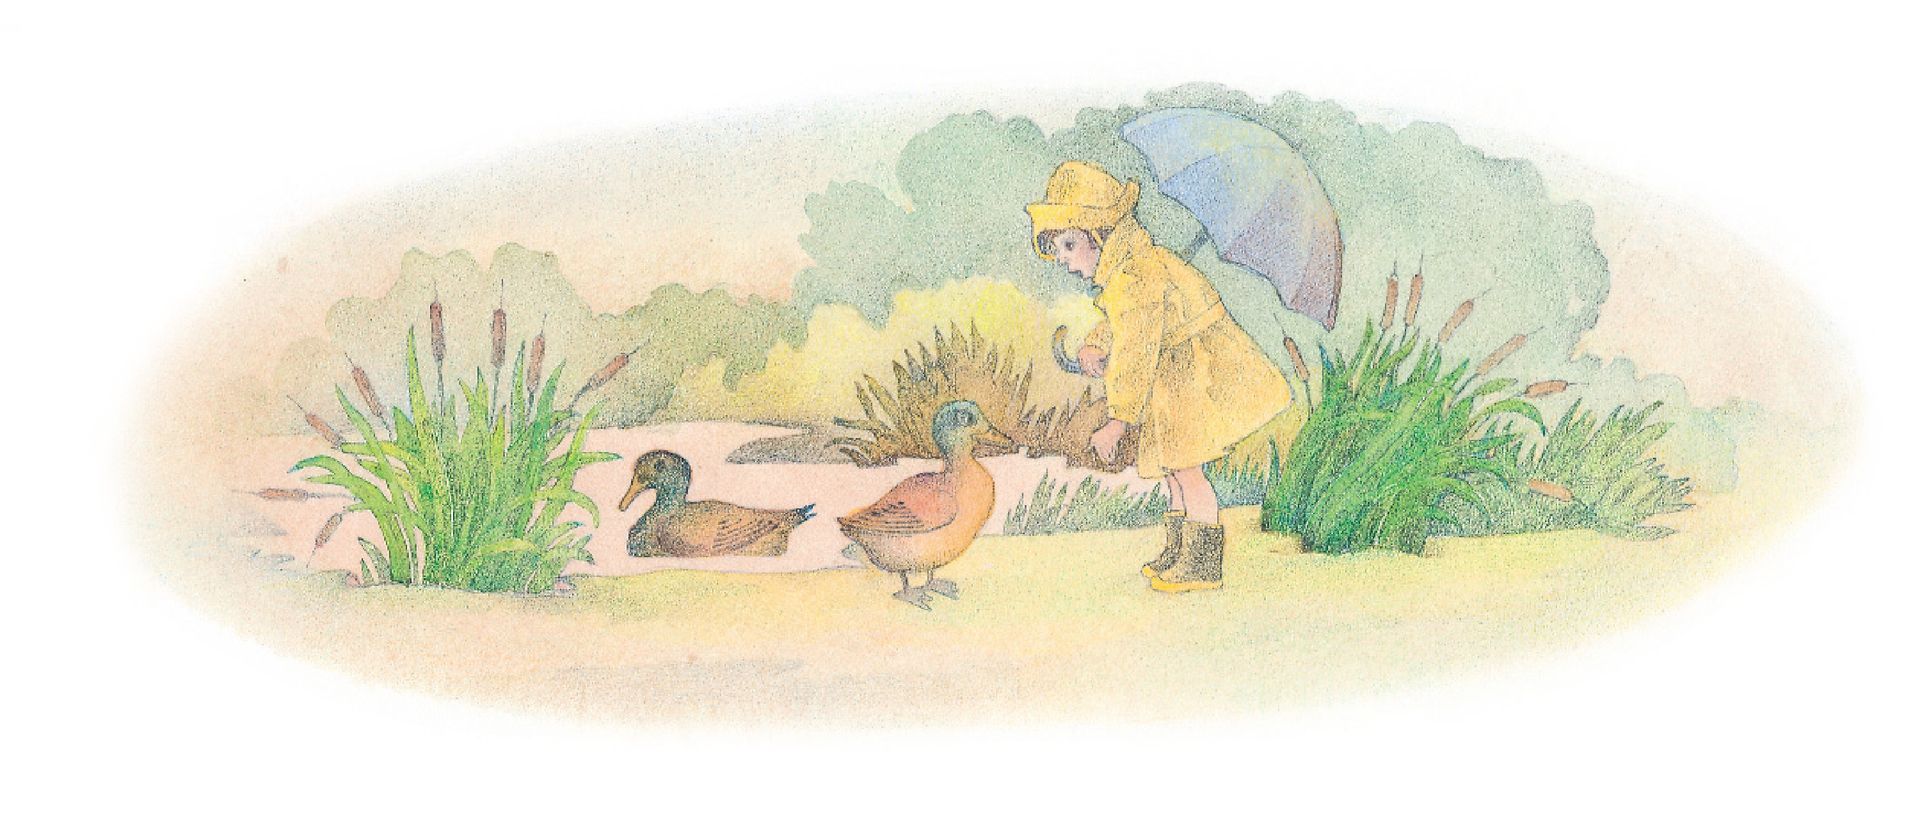 A child in a raincoat with an umbrella, walking near a river with a duck. From the Children’s Songbook, page 264, “Happy Song”; watercolor illustration by Richard Hull.